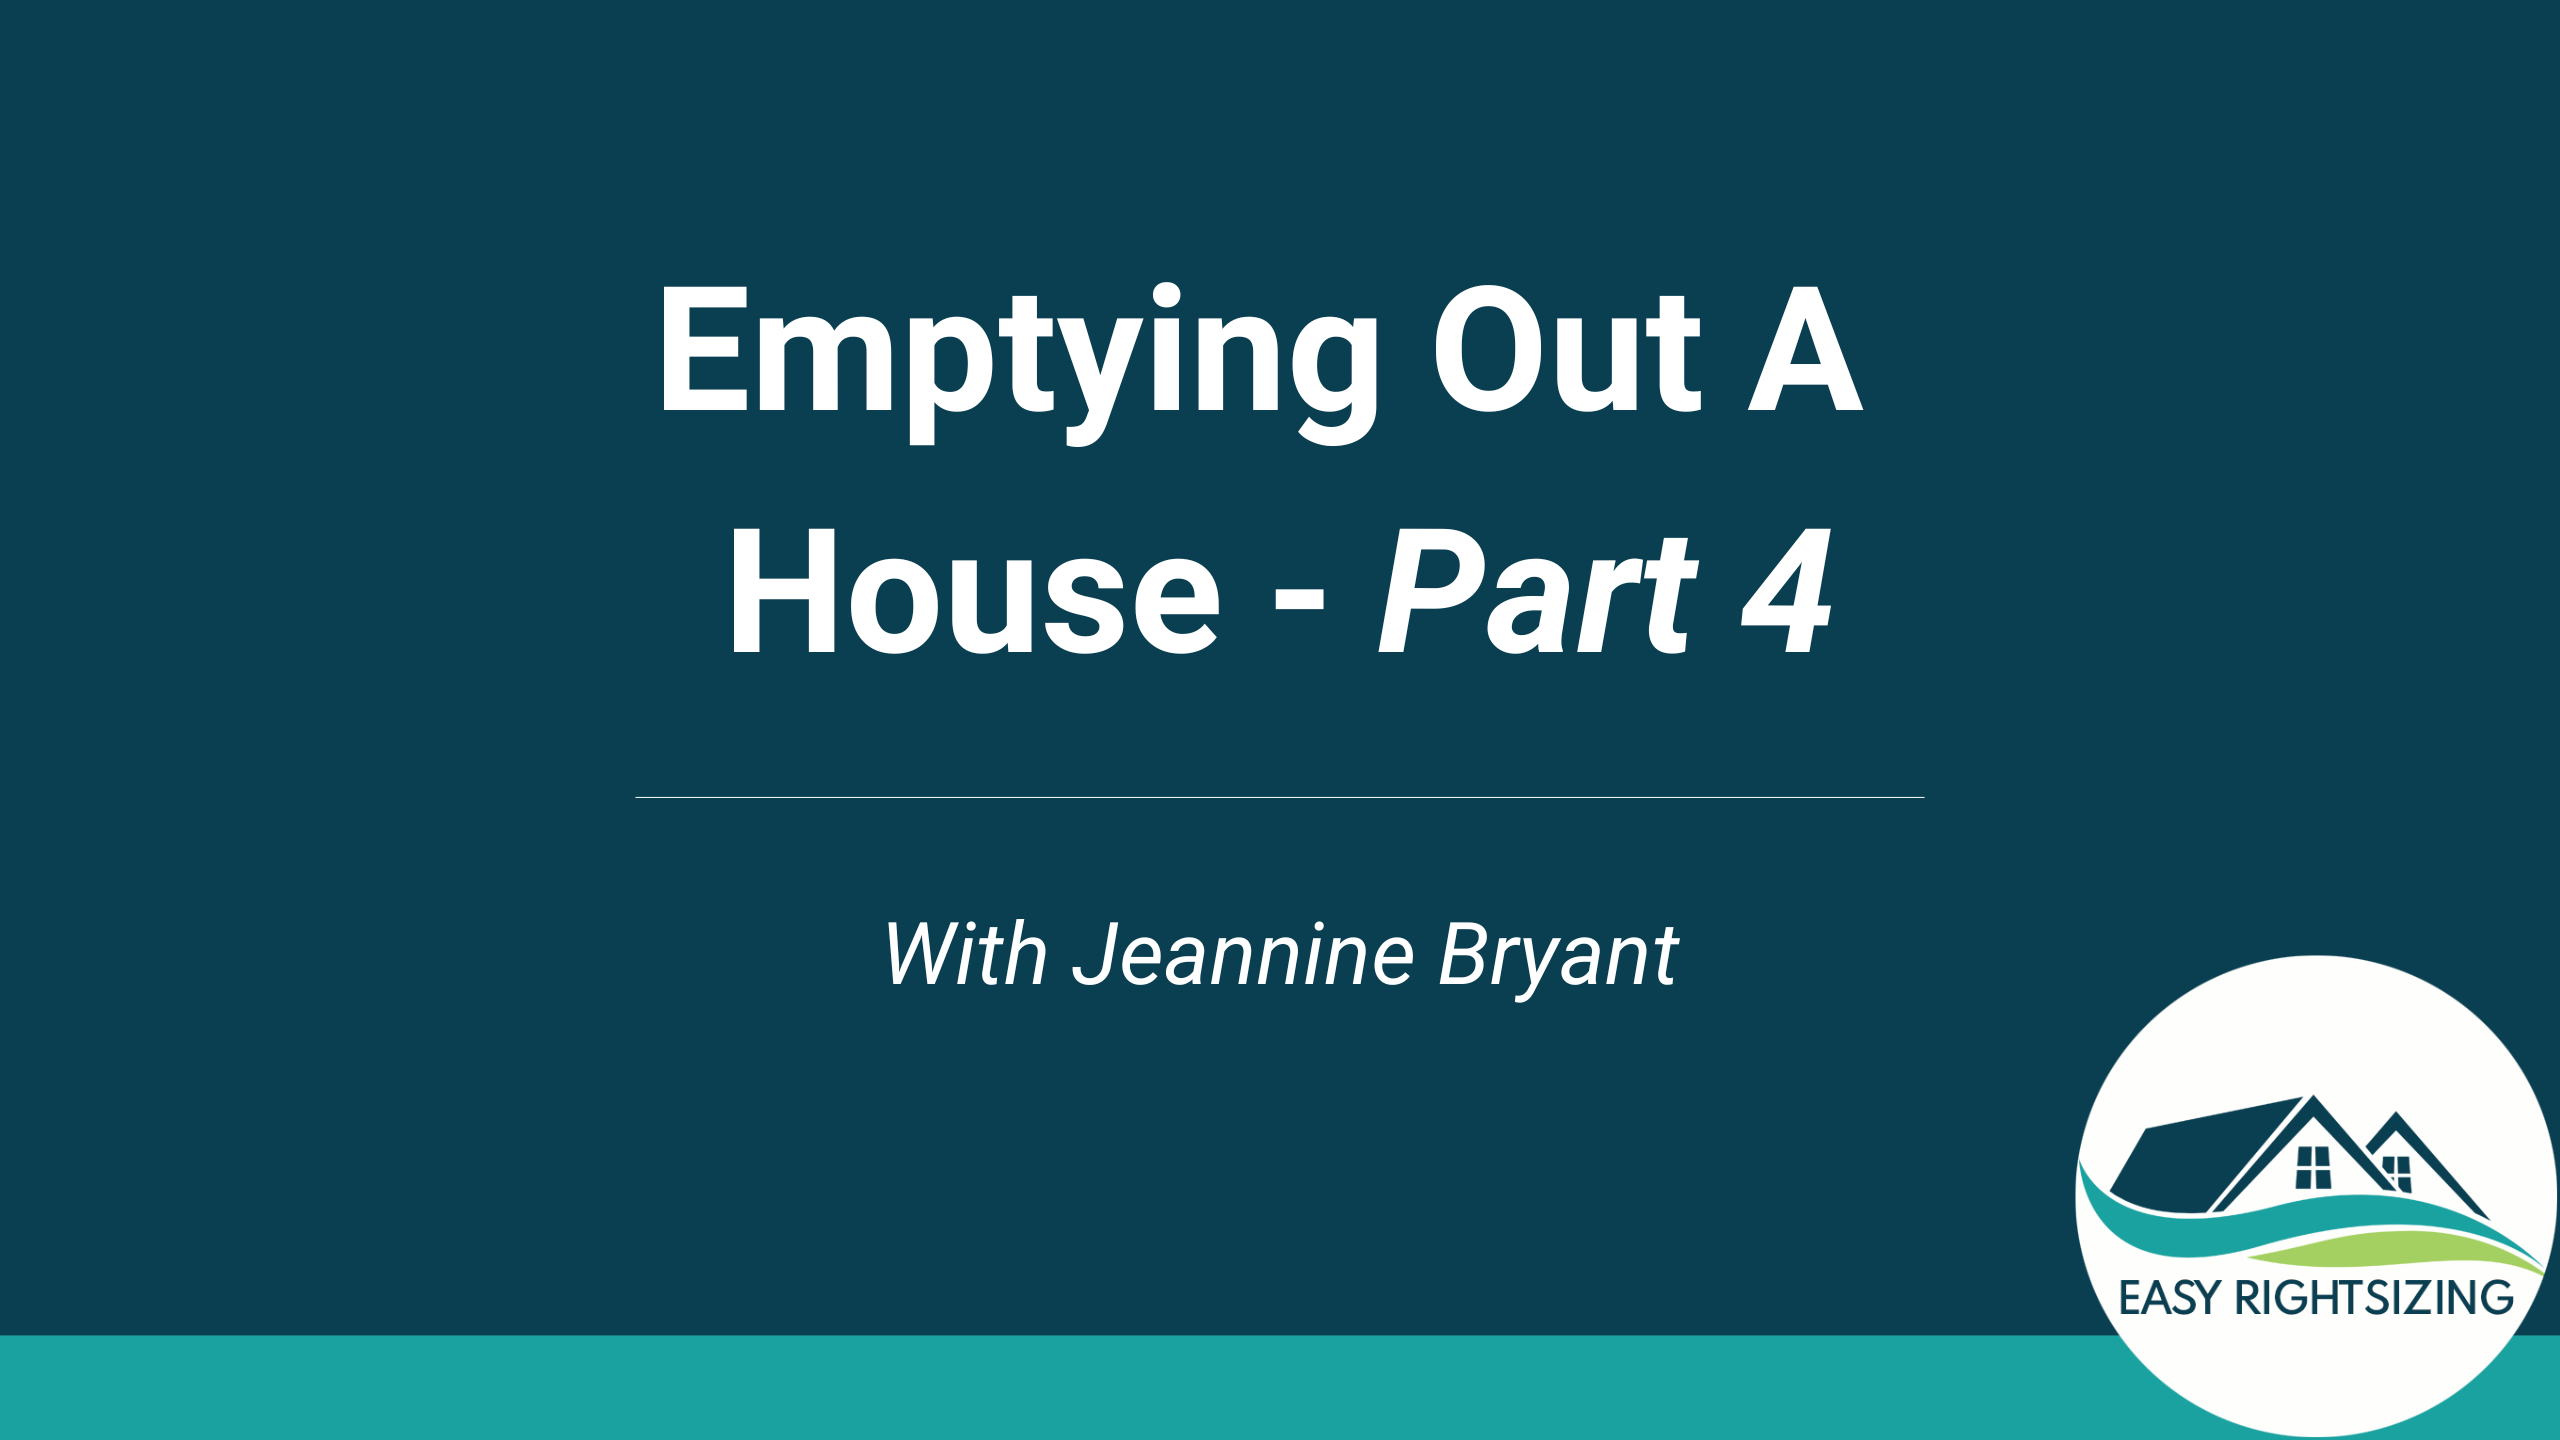 Emptying Out A House - Part 4